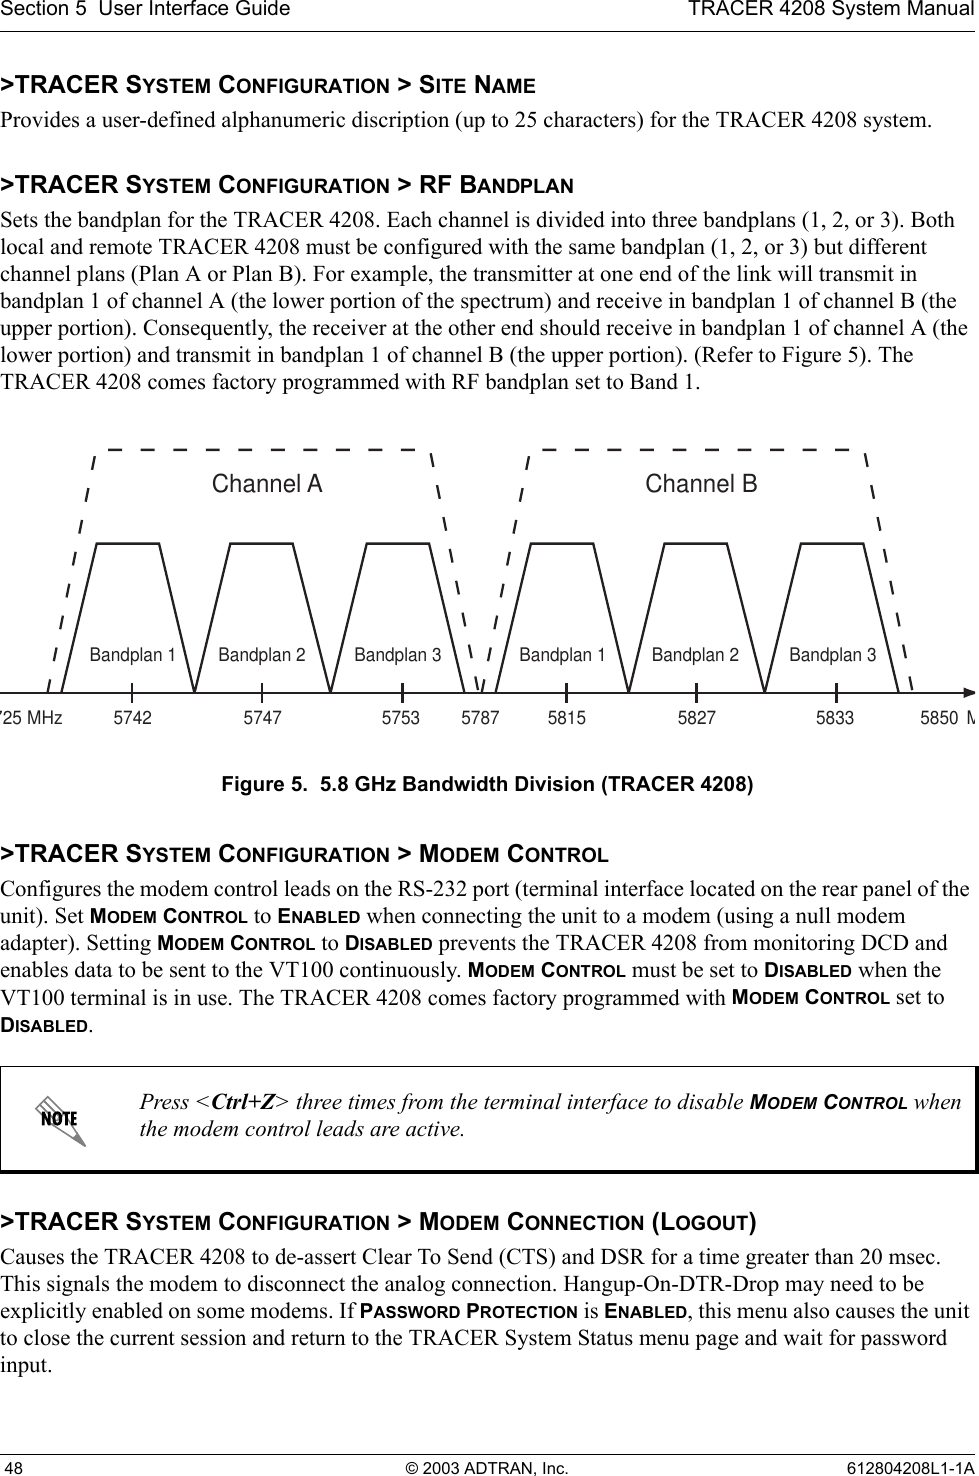 Section 5  User Interface Guide TRACER 4208 System Manual 48 © 2003 ADTRAN, Inc. 612804208L1-1A&gt;TRACER SYSTEM CONFIGURATION &gt; SITE NAMEProvides a user-defined alphanumeric discription (up to 25 characters) for the TRACER 4208 system.&gt;TRACER SYSTEM CONFIGURATION &gt; RF BANDPLANSets the bandplan for the TRACER 4208. Each channel is divided into three bandplans (1, 2, or 3). Both local and remote TRACER 4208 must be configured with the same bandplan (1, 2, or 3) but different channel plans (Plan A or Plan B). For example, the transmitter at one end of the link will transmit in bandplan 1 of channel A (the lower portion of the spectrum) and receive in bandplan 1 of channel B (the upper portion). Consequently, the receiver at the other end should receive in bandplan 1 of channel A (the lower portion) and transmit in bandplan 1 of channel B (the upper portion). (Refer to Figure 5). The TRACER 4208 comes factory programmed with RF bandplan set to Band 1.Figure 5.  5.8 GHz Bandwidth Division (TRACER 4208)&gt;TRACER SYSTEM CONFIGURATION &gt; MODEM CONTROLConfigures the modem control leads on the RS-232 port (terminal interface located on the rear panel of the unit). Set MODEM CONTROL to ENABLED when connecting the unit to a modem (using a null modem adapter). Setting MODEM CONTROL to DISABLED prevents the TRACER 4208 from monitoring DCD and enables data to be sent to the VT100 continuously. MODEM CONTROL must be set to DISABLED when the VT100 terminal is in use. The TRACER 4208 comes factory programmed with MODEM CONTROL set to DISABLED.&gt;TRACER SYSTEM CONFIGURATION &gt; MODEM CONNECTION (LOGOUT)Causes the TRACER 4208 to de-assert Clear To Send (CTS) and DSR for a time greater than 20 msec. This signals the modem to disconnect the analog connection. Hangup-On-DTR-Drop may need to be explicitly enabled on some modems. If PASSWORD PROTECTION is ENABLED, this menu also causes the unit to close the current session and return to the TRACER System Status menu page and wait for password input.Press &lt;Ctrl+Z&gt; three times from the terminal interface to disable MODEM CONTROL when the modem control leads are active.ChannelA5742725 5787 58505747 5753MHzMBandplan3Bandplan2Bandplan1ChannelB5815 5827 5833Bandplan3Bandplan2Bandplan1